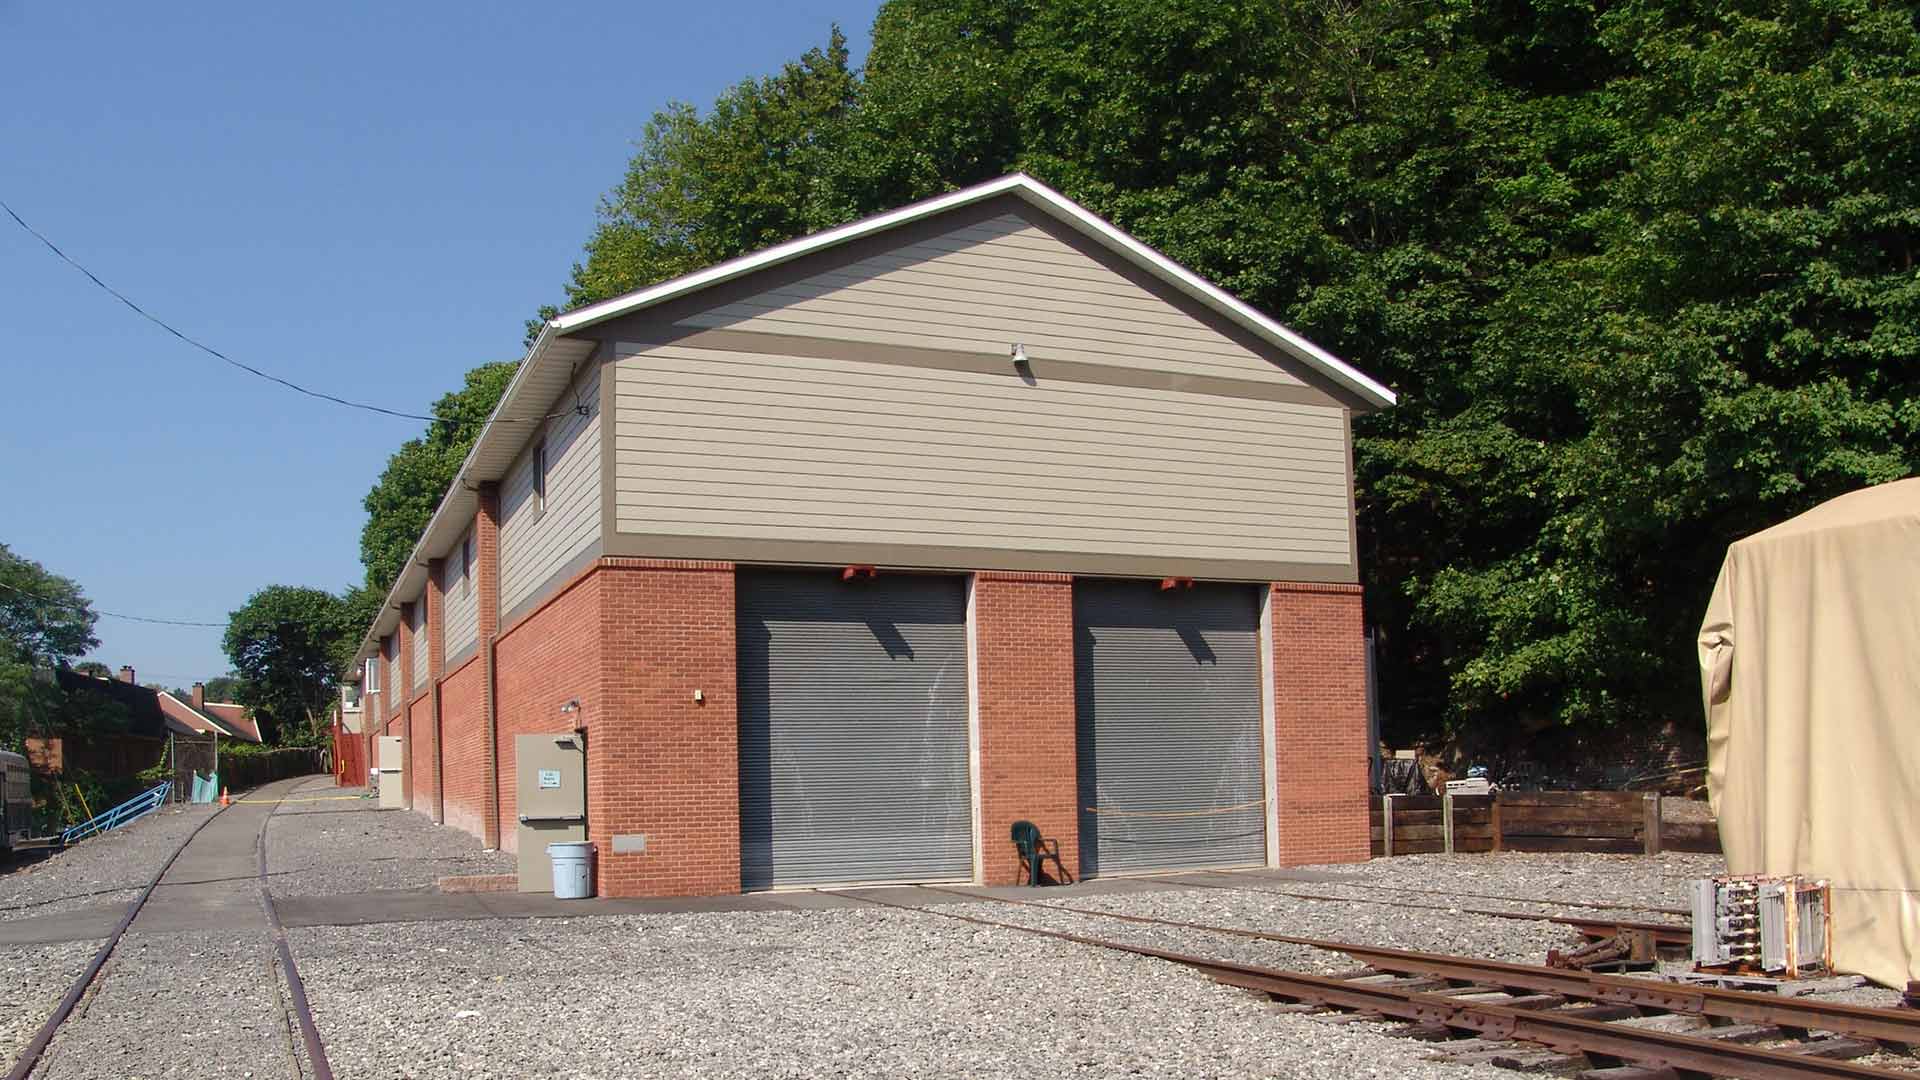 North side of the Kingston Trolley Museum after renovation